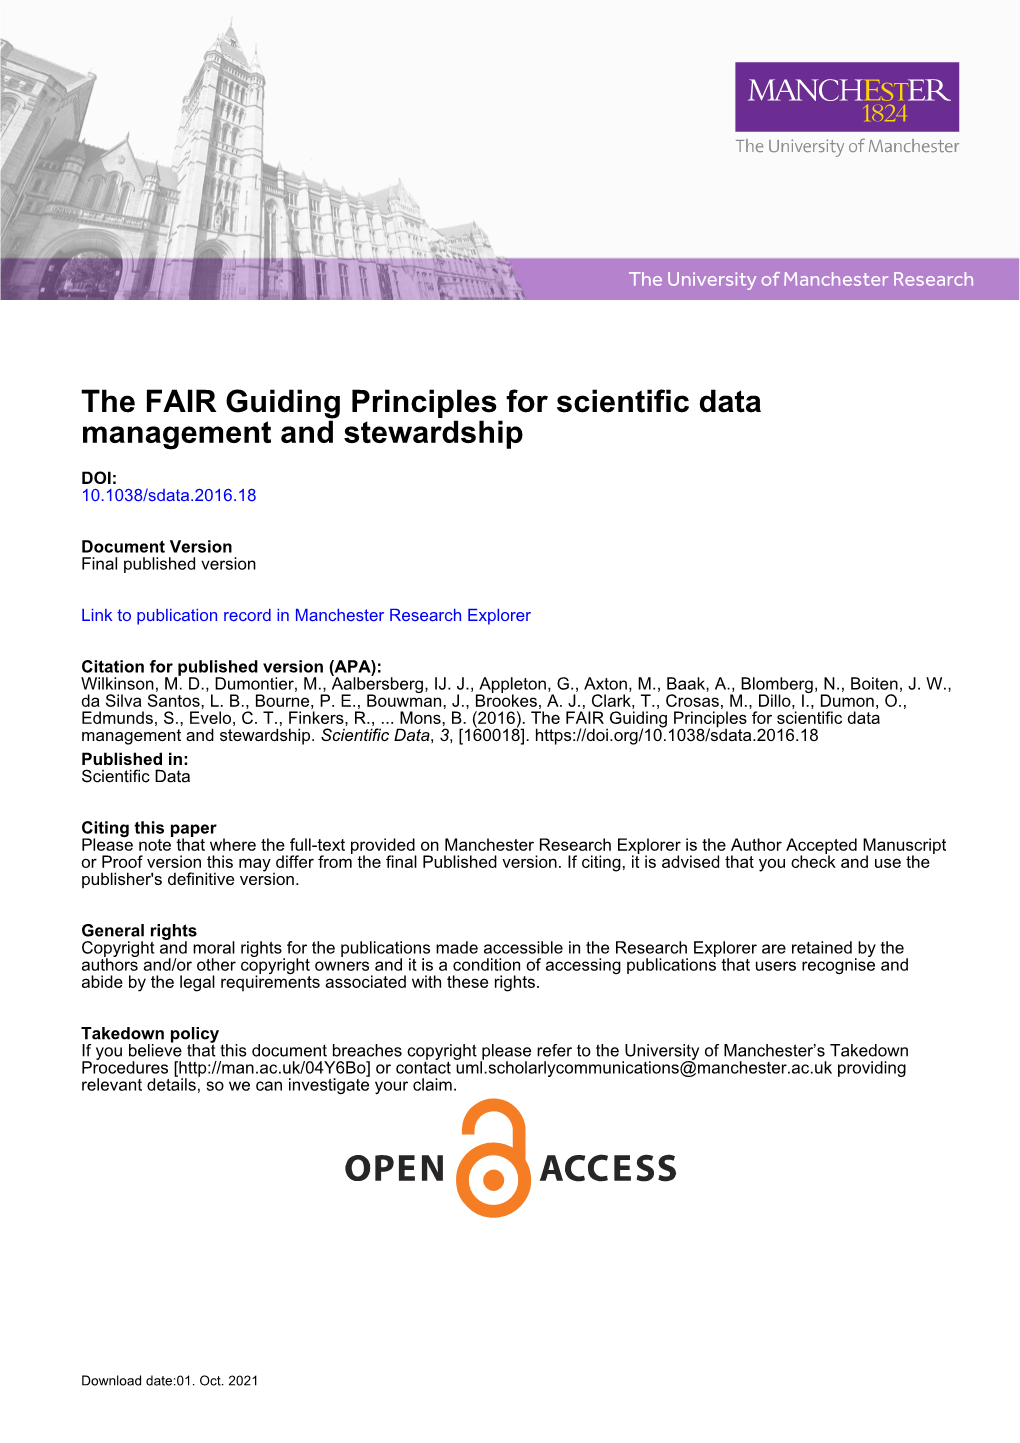 The FAIR Guiding Principles for Scientific Data Management and Stewardship